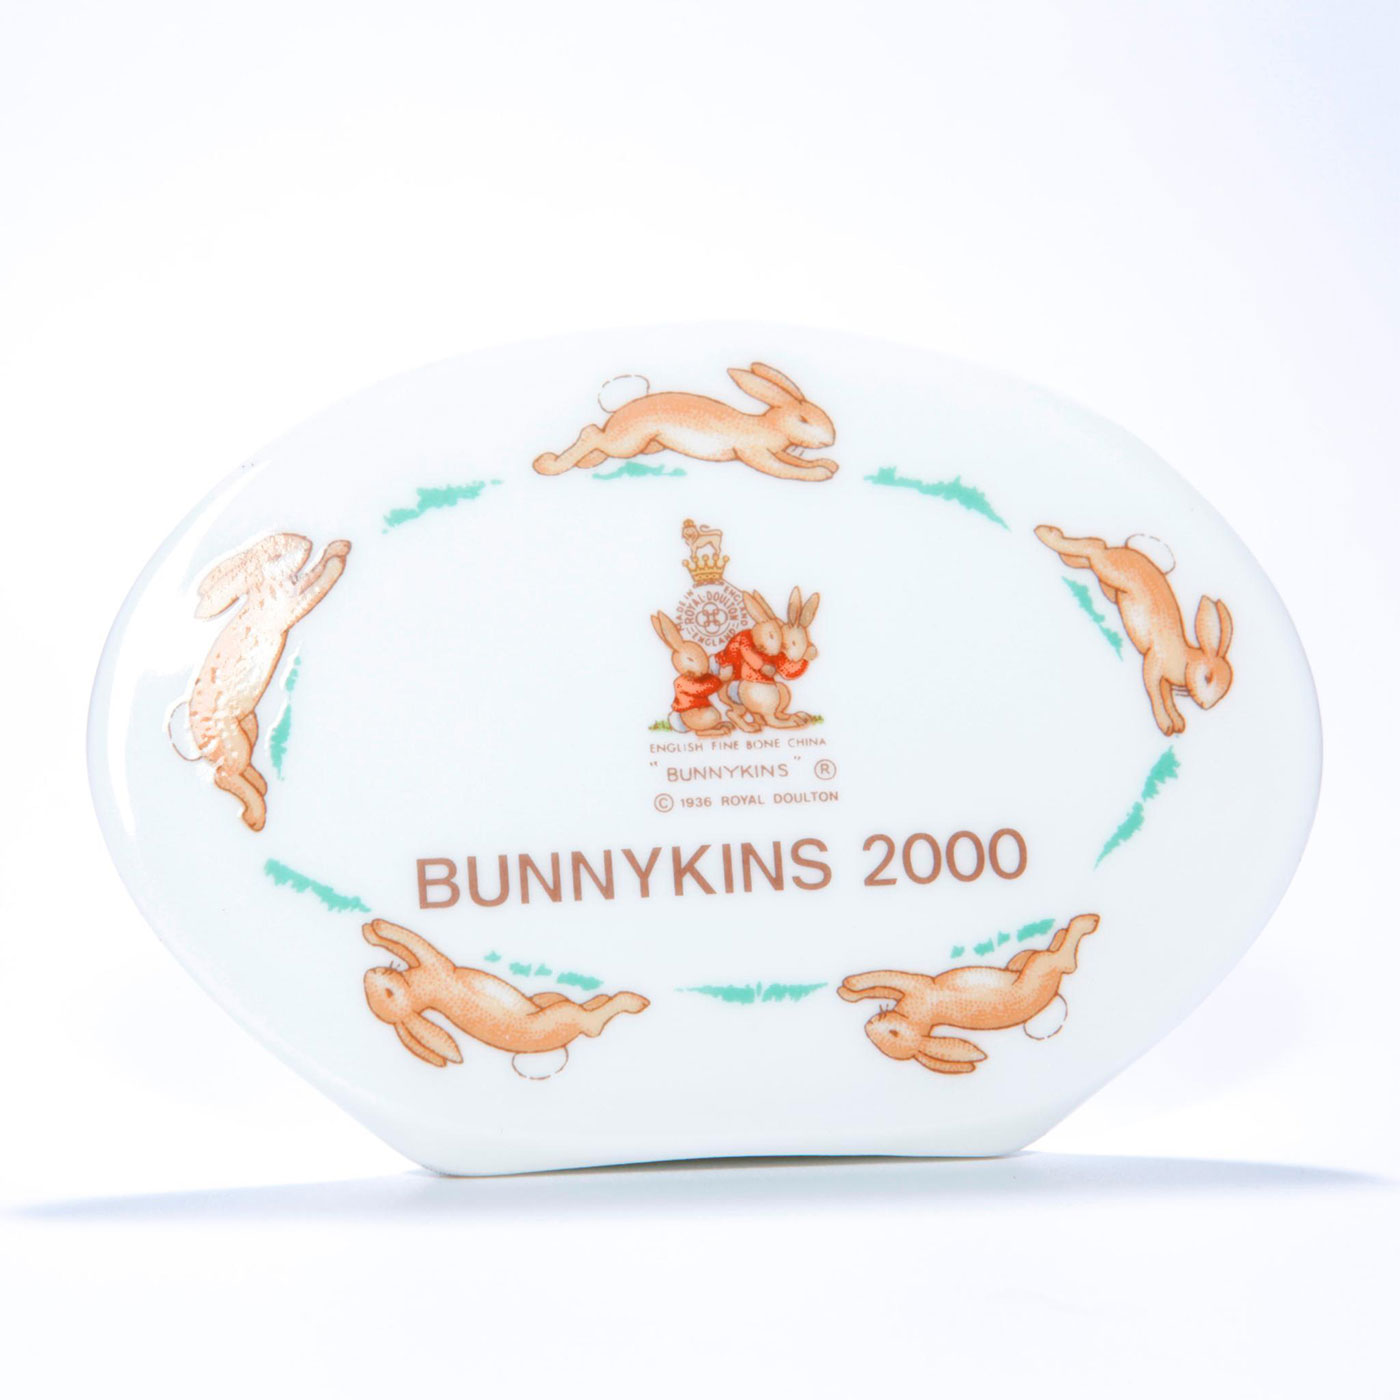 ROYAL DOULTON 2 BUNNYKINS NAME STANDS - Image 3 of 3